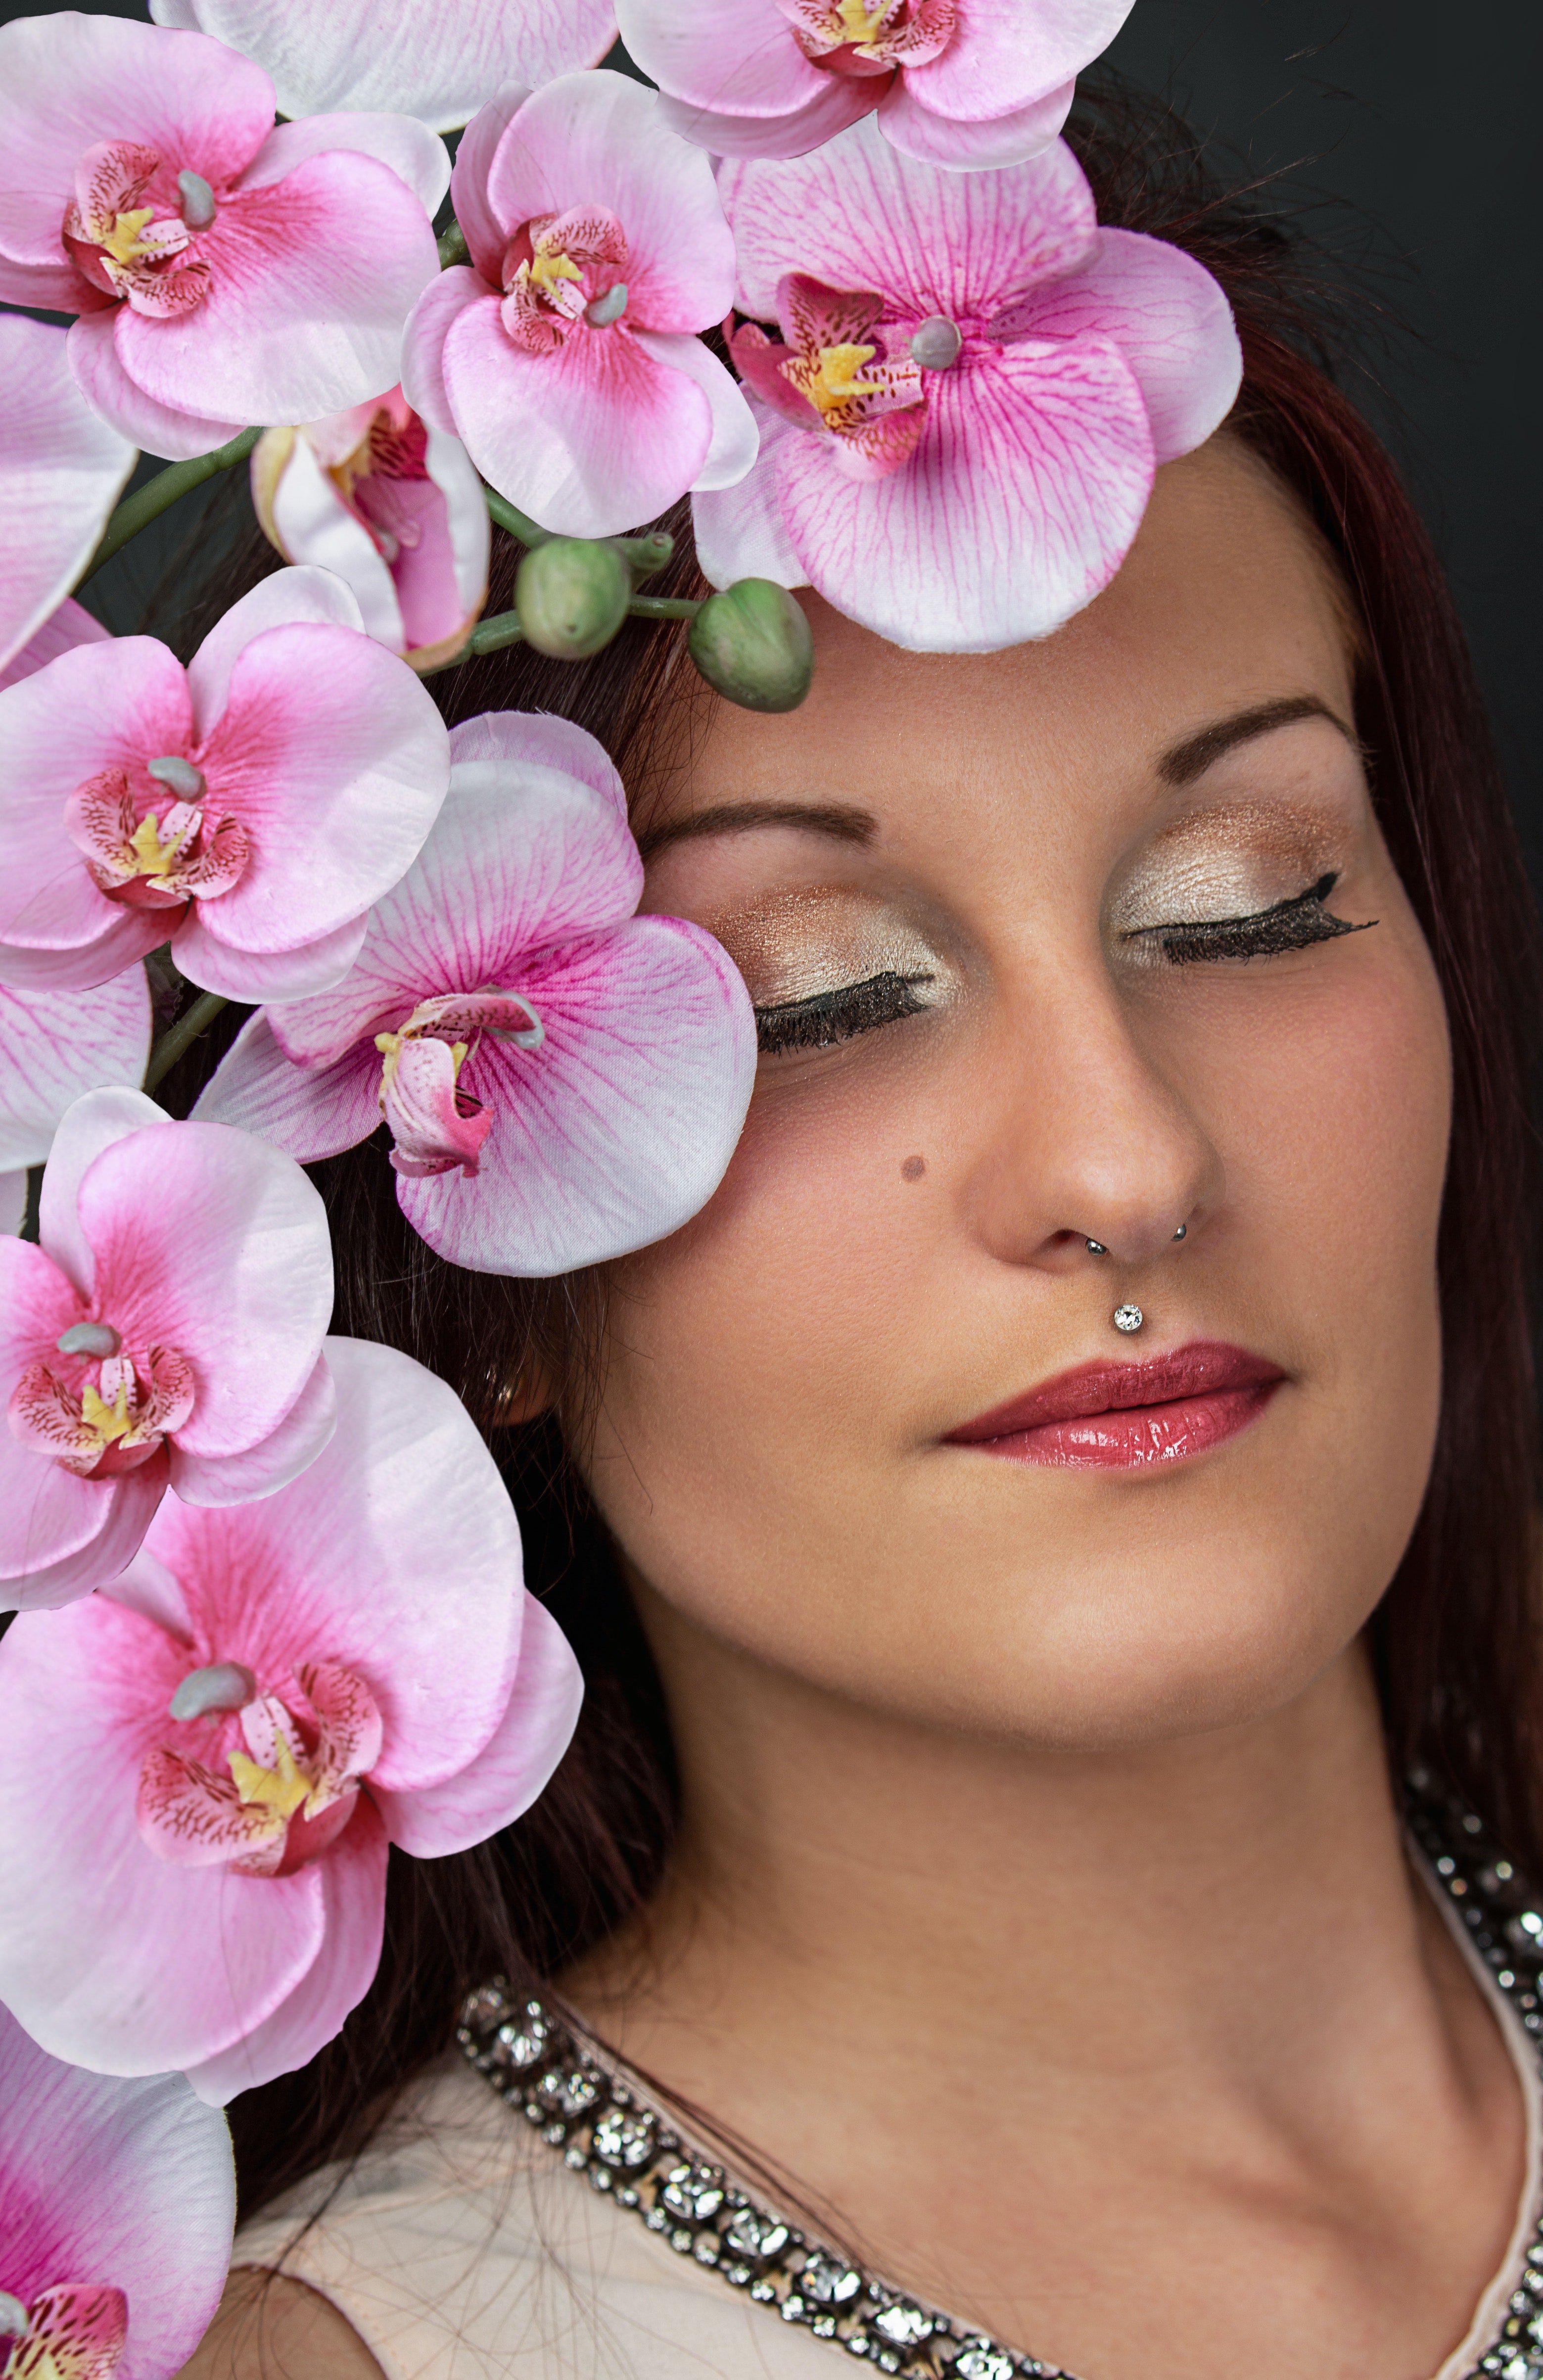 Woman with Medusa piercing and pink orchids hair decoration | Source: Pexels.com/Antonio Friedemann